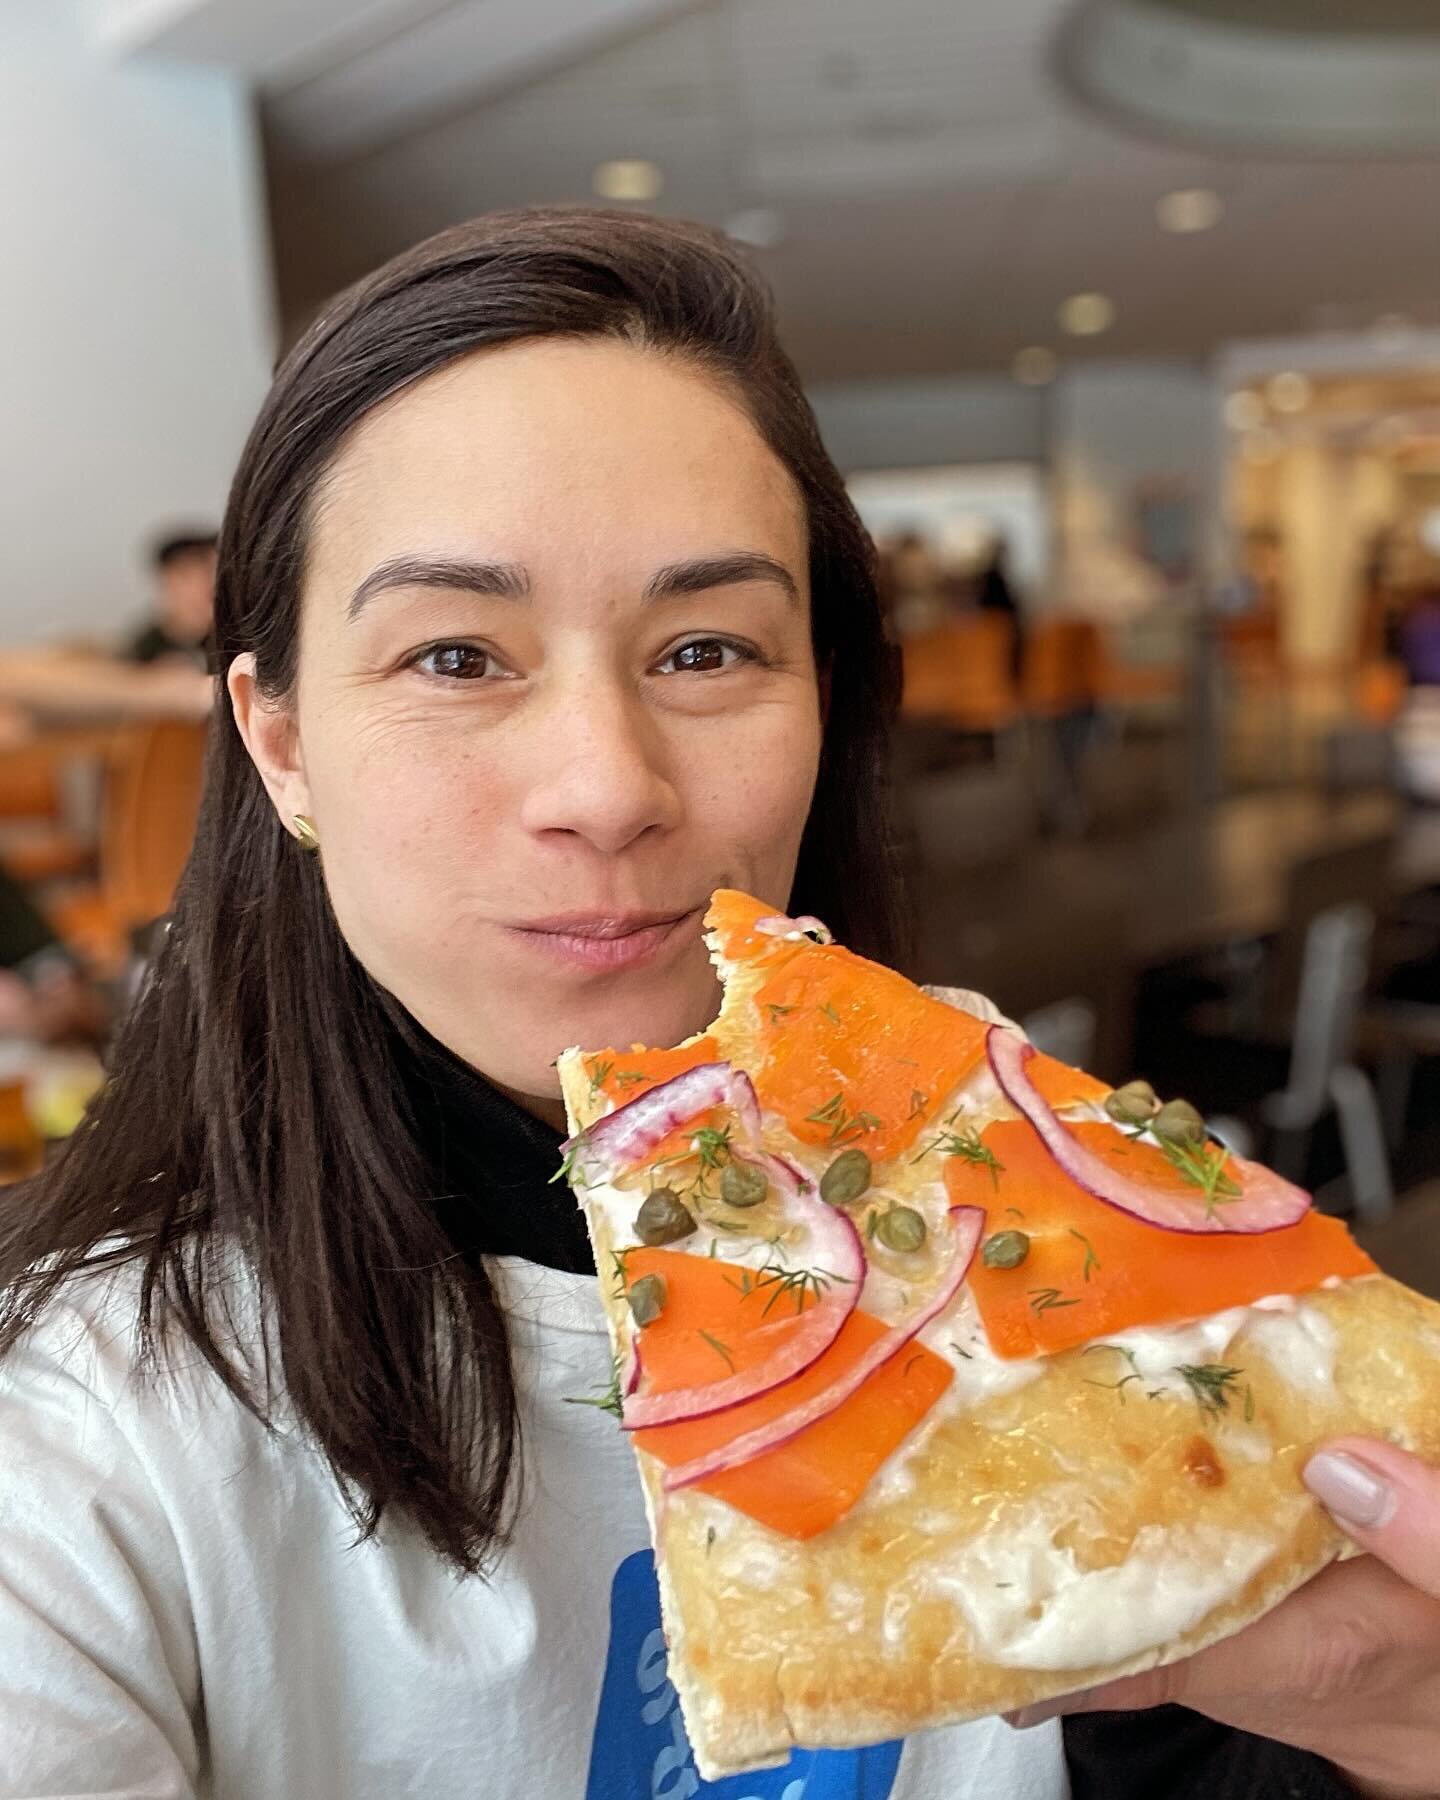 There&rsquo;s no question that being a food founder is hard. But the rewards are bountiful including getting to see our product being served in delicious and delightful ways. Today I got to enjoy our smoked salmon on a pizza at Feast, one of UBC&rsqu